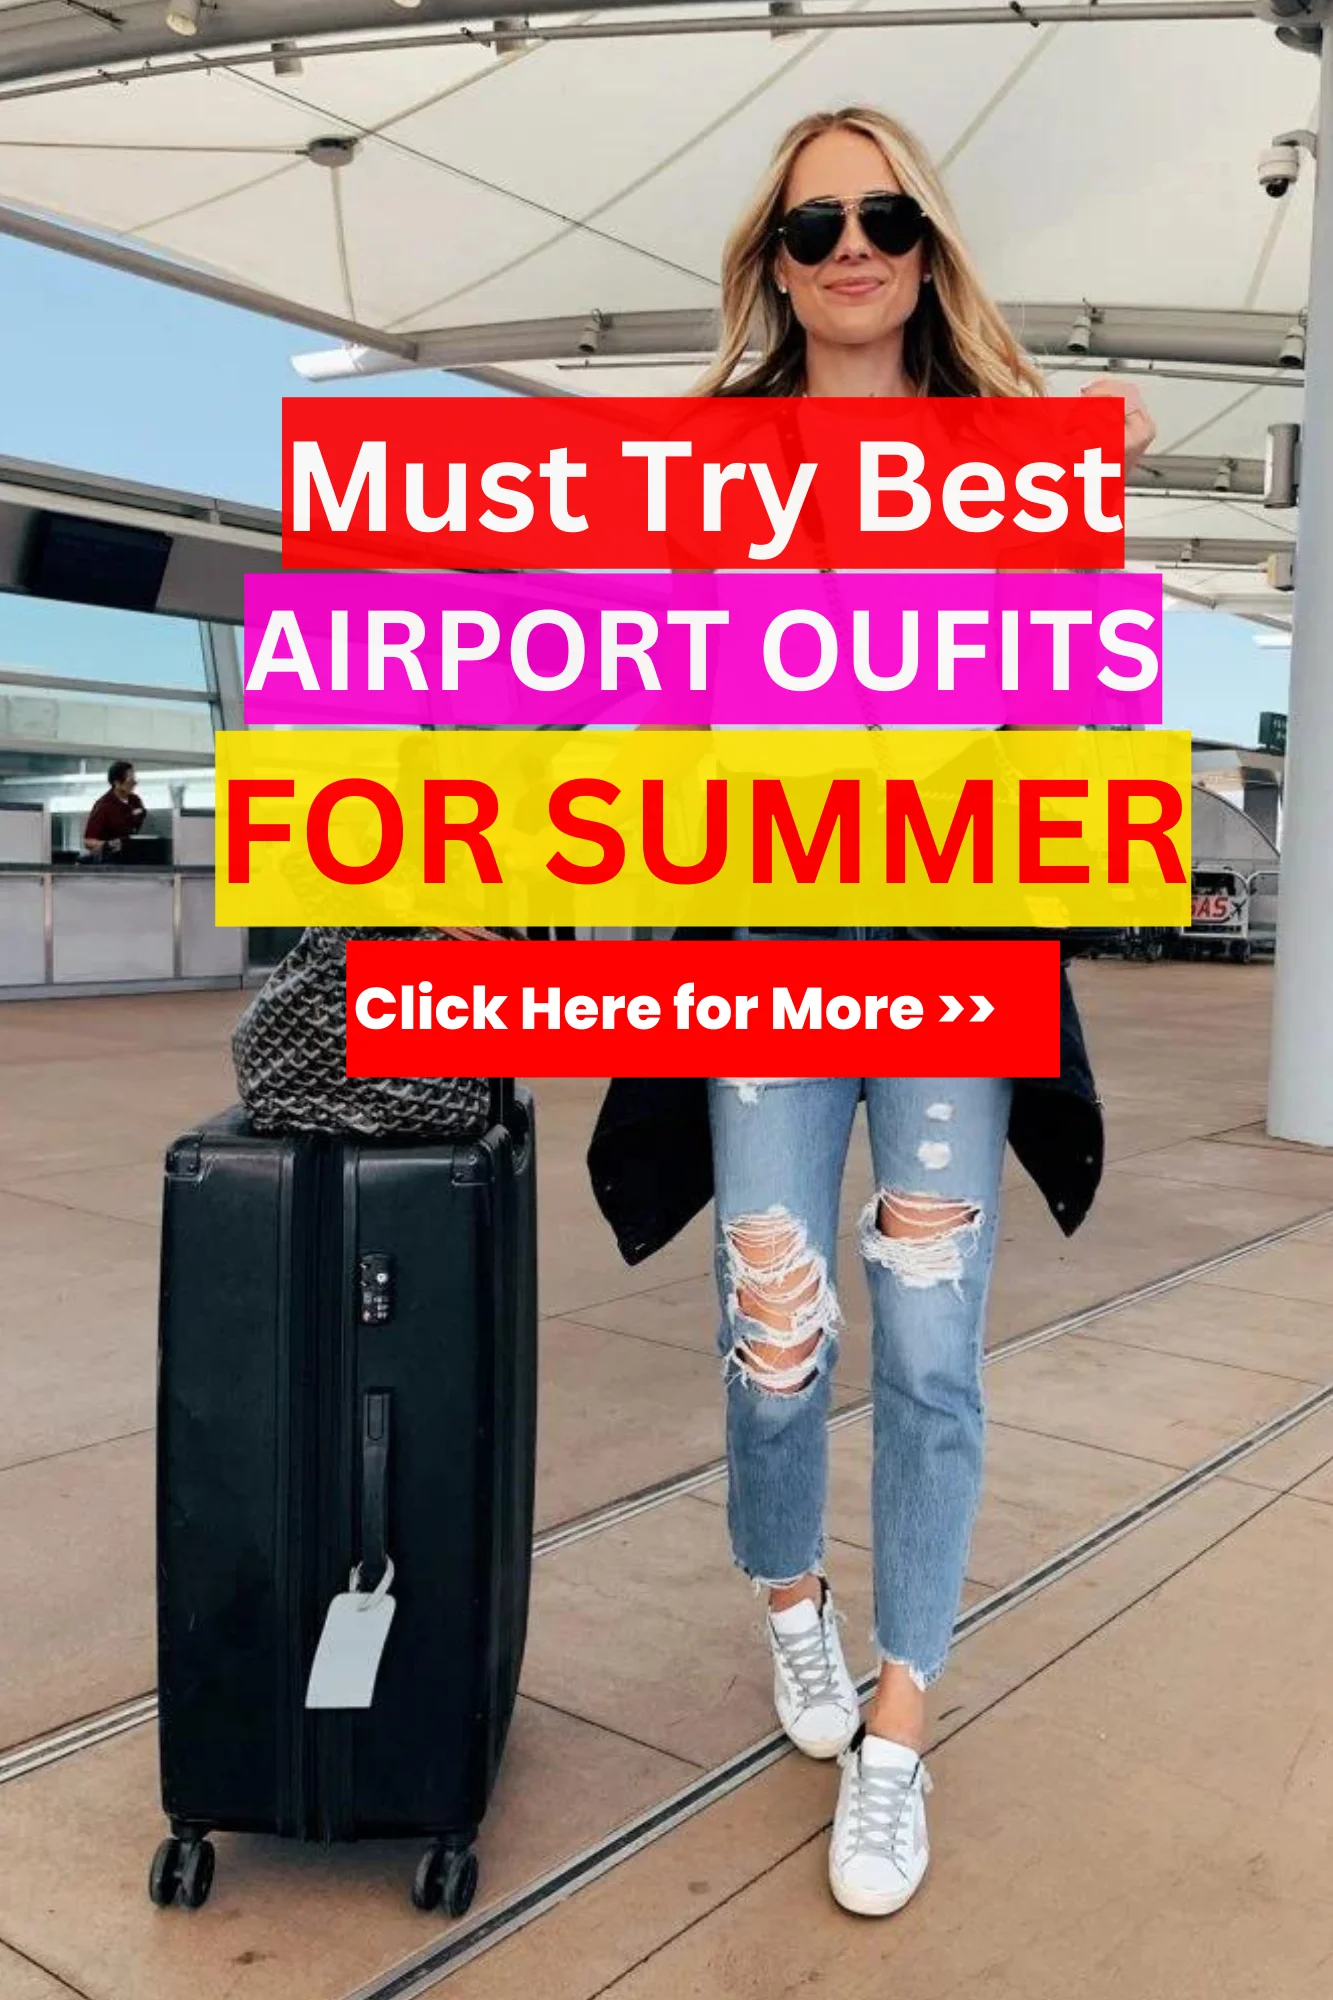 AIRPORT OUTFIT IDEAS 1